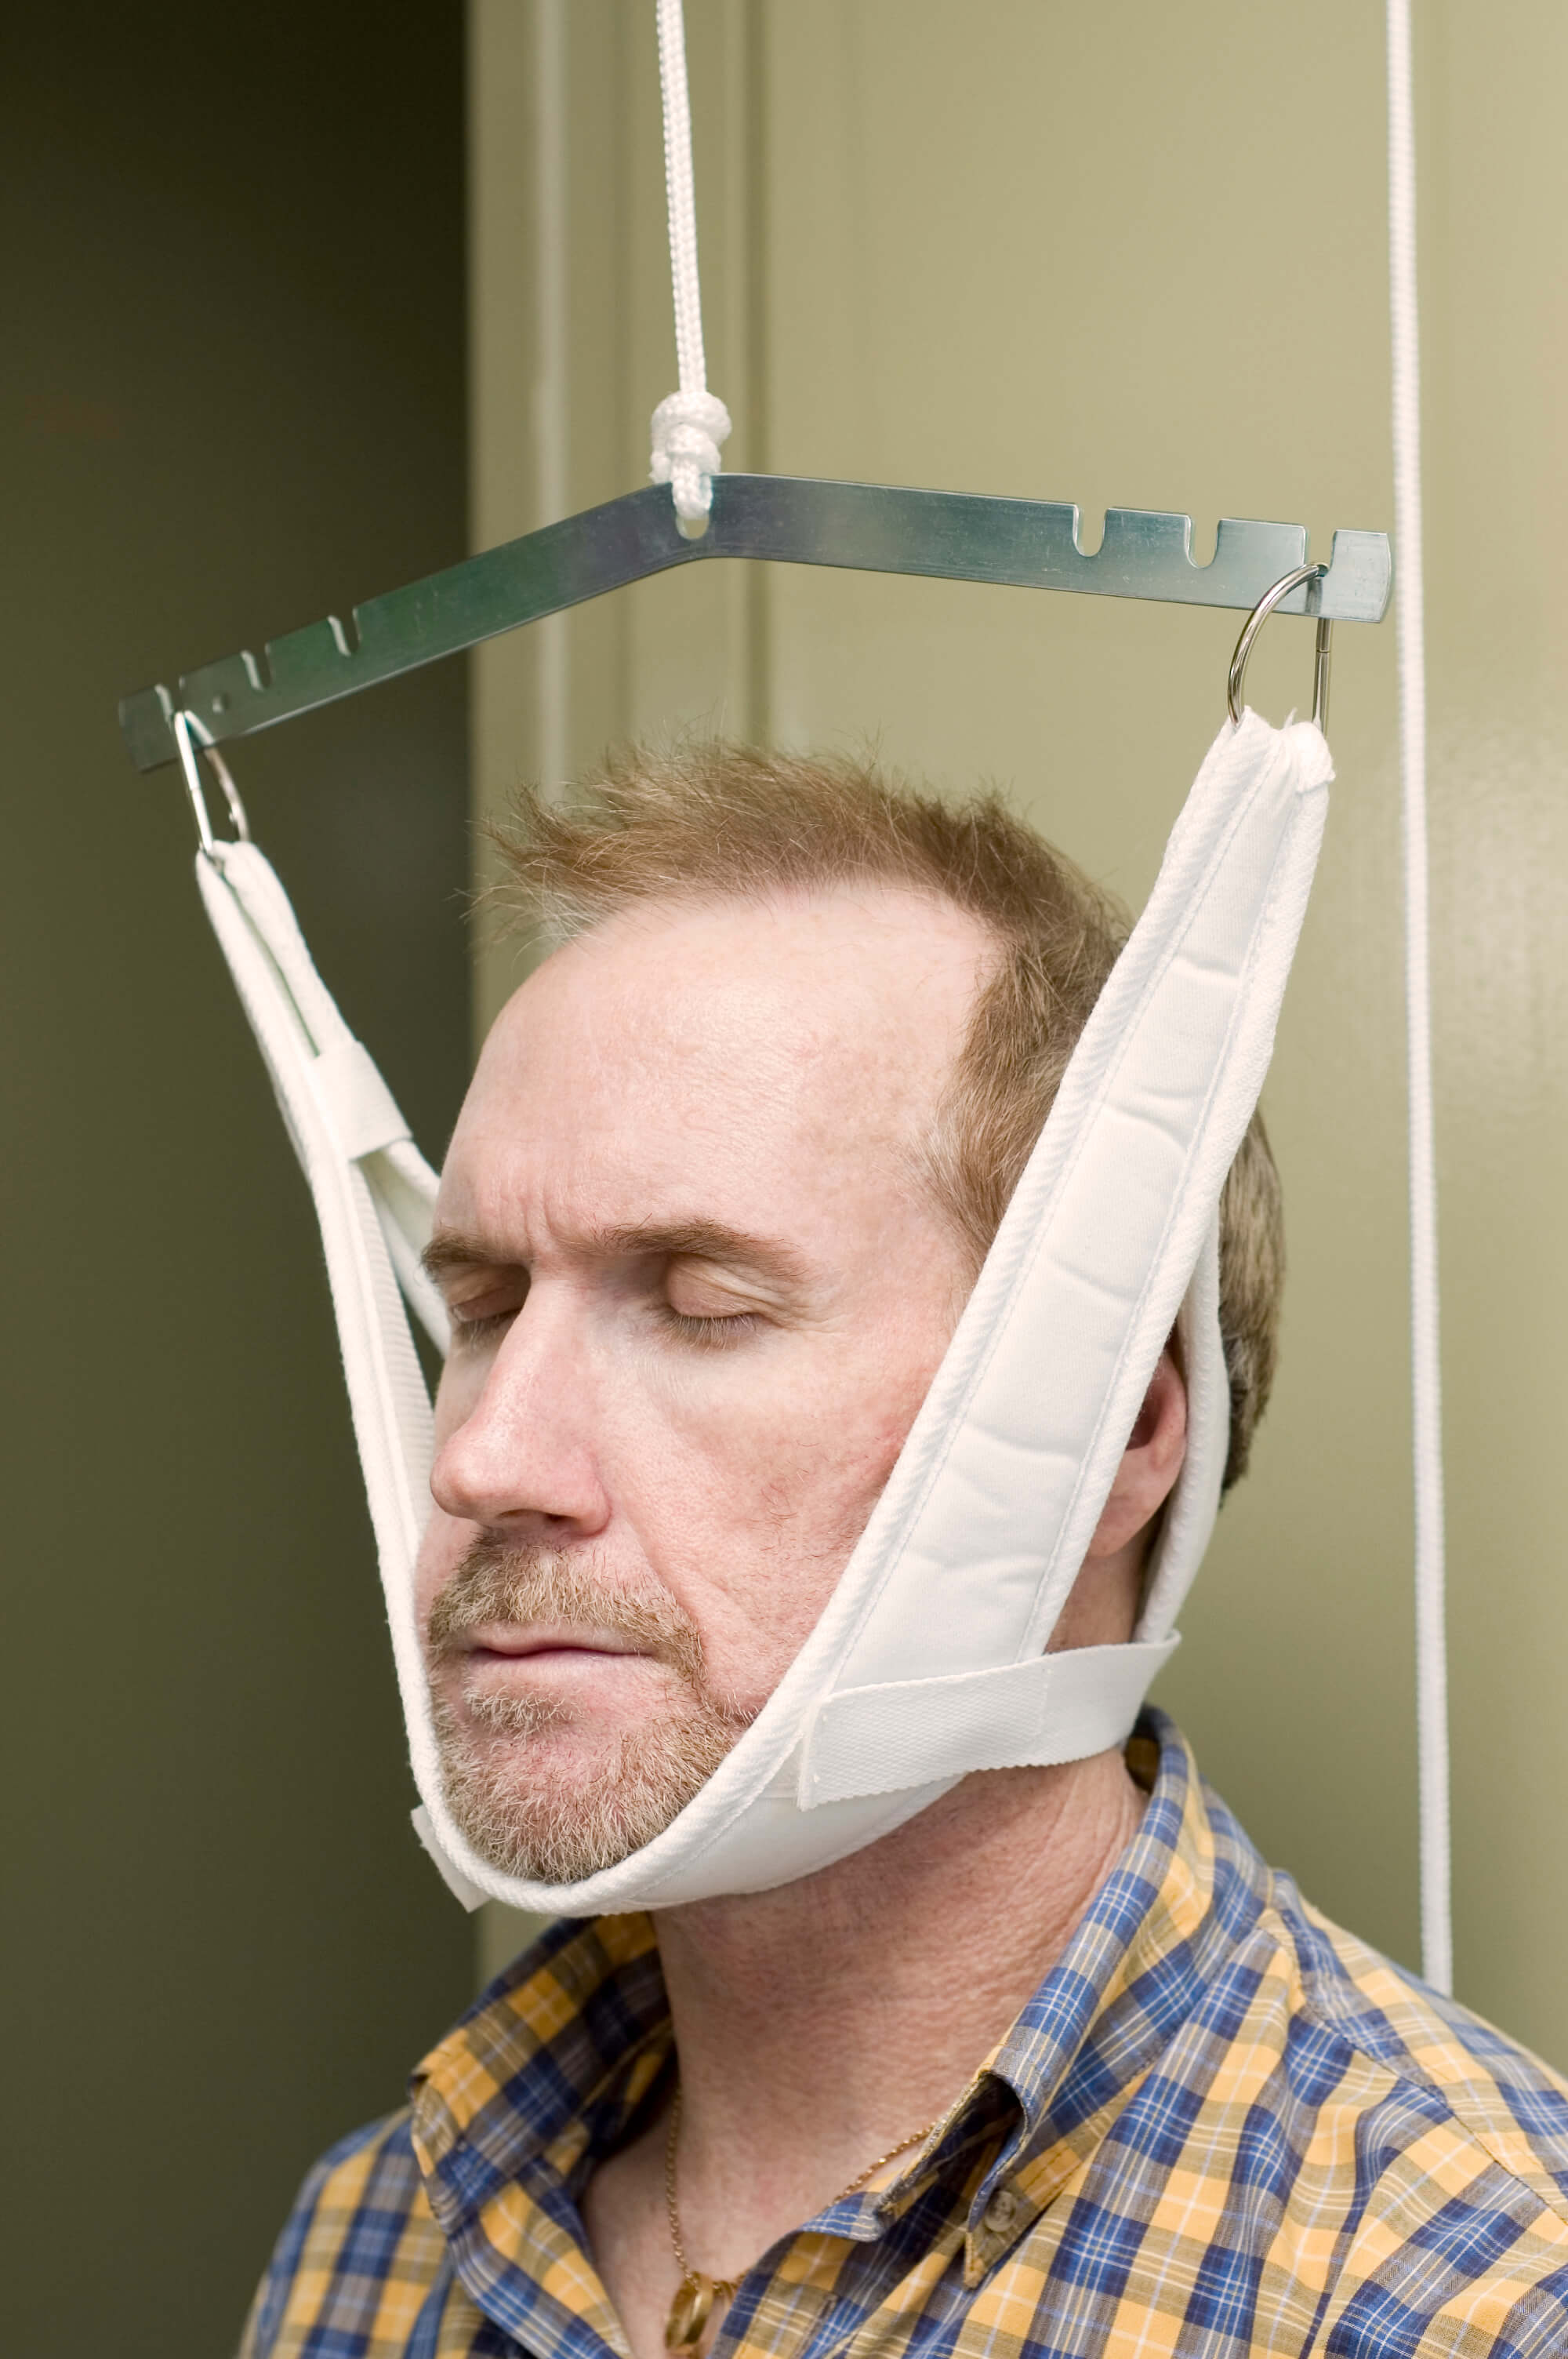 Neck rehabilitation with traction